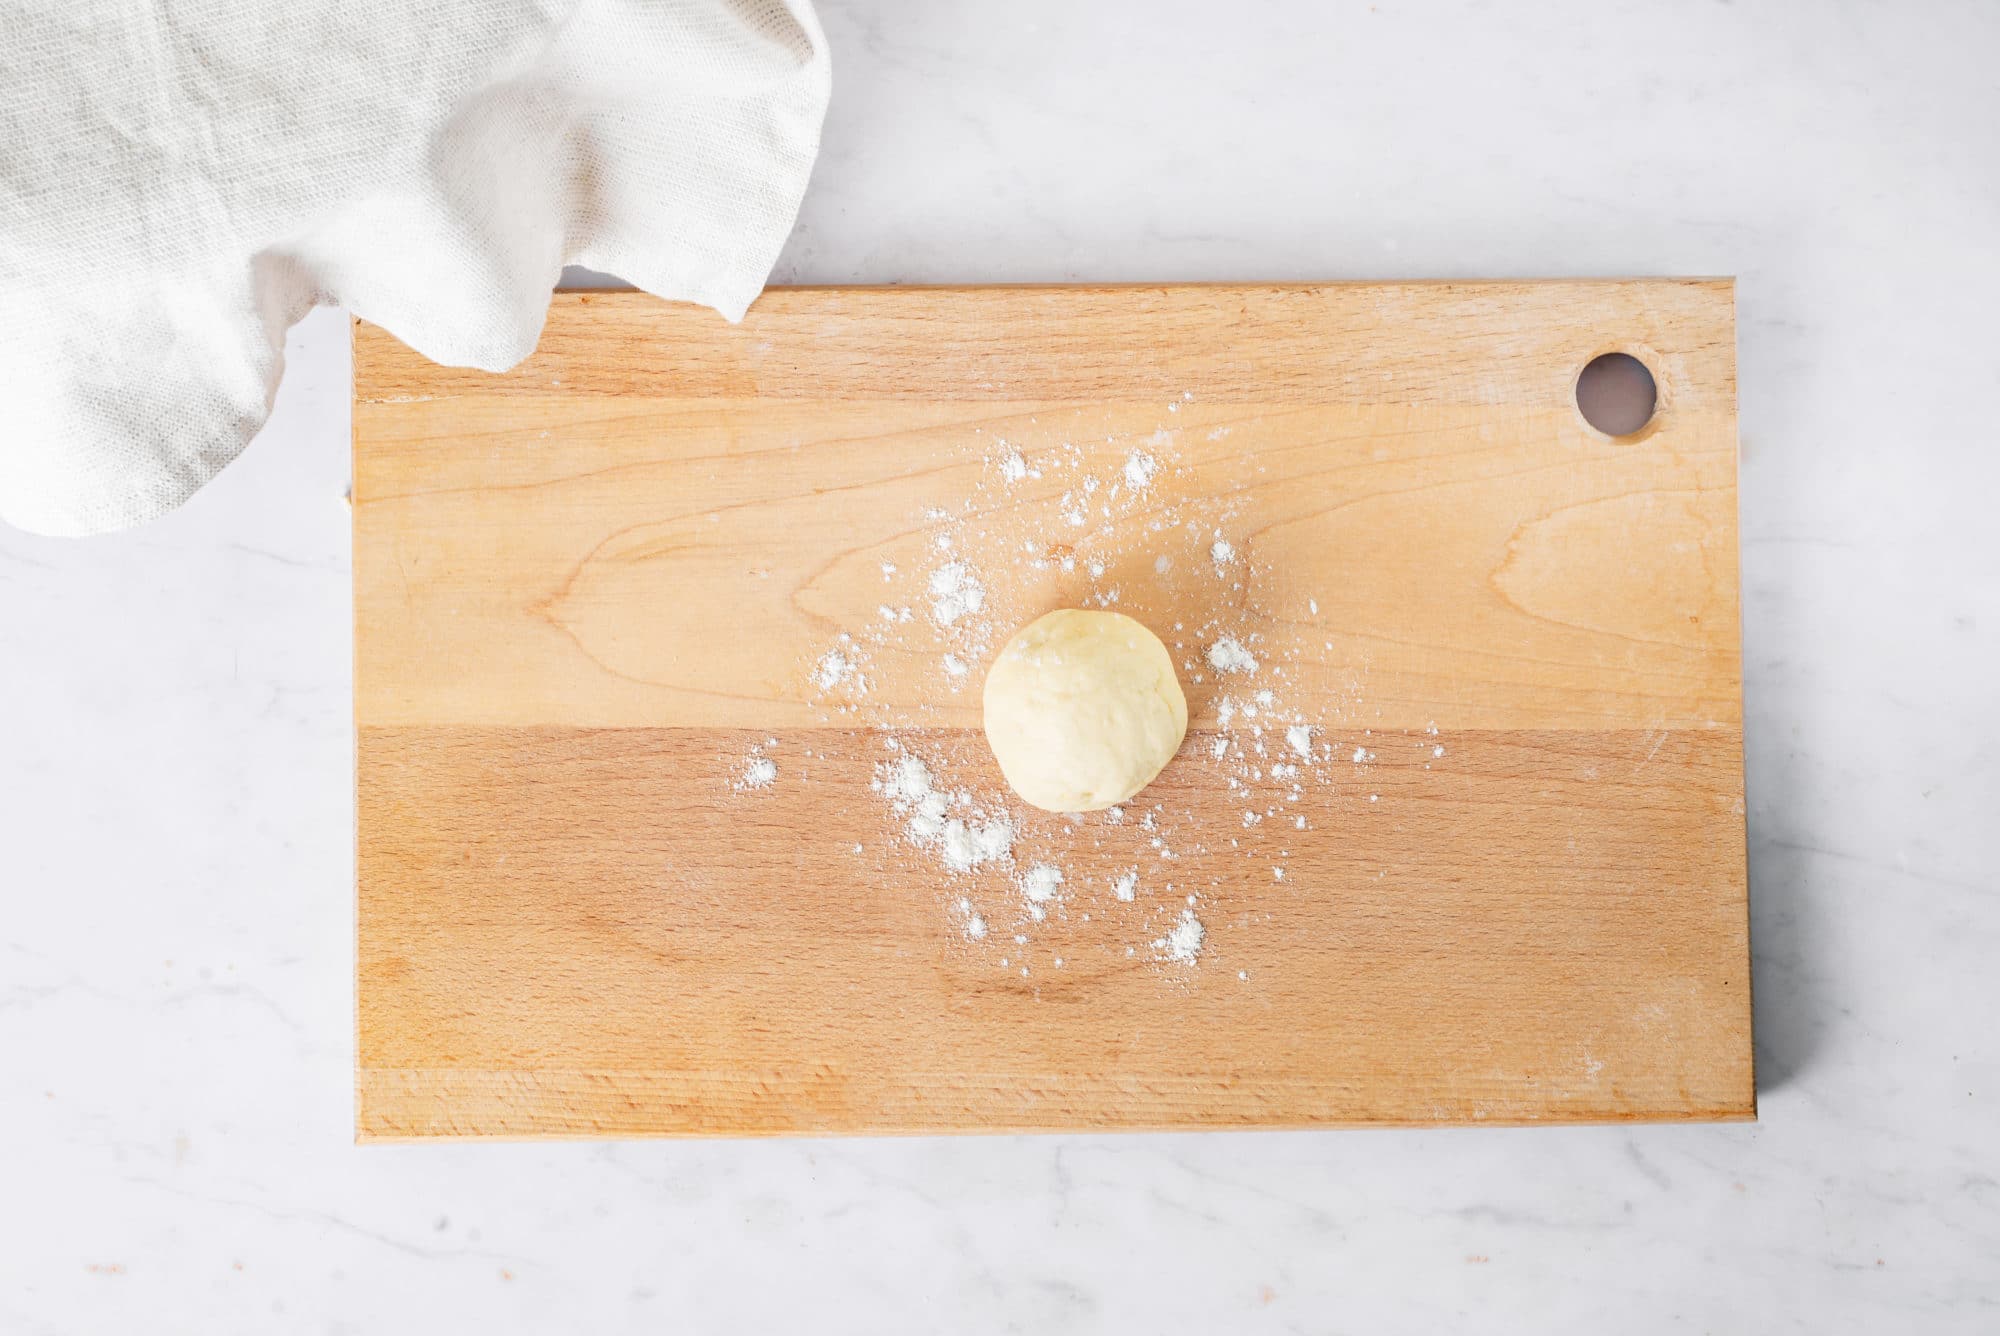 A little ball of dough on a wooden cutting board with some flour sprinkled around.